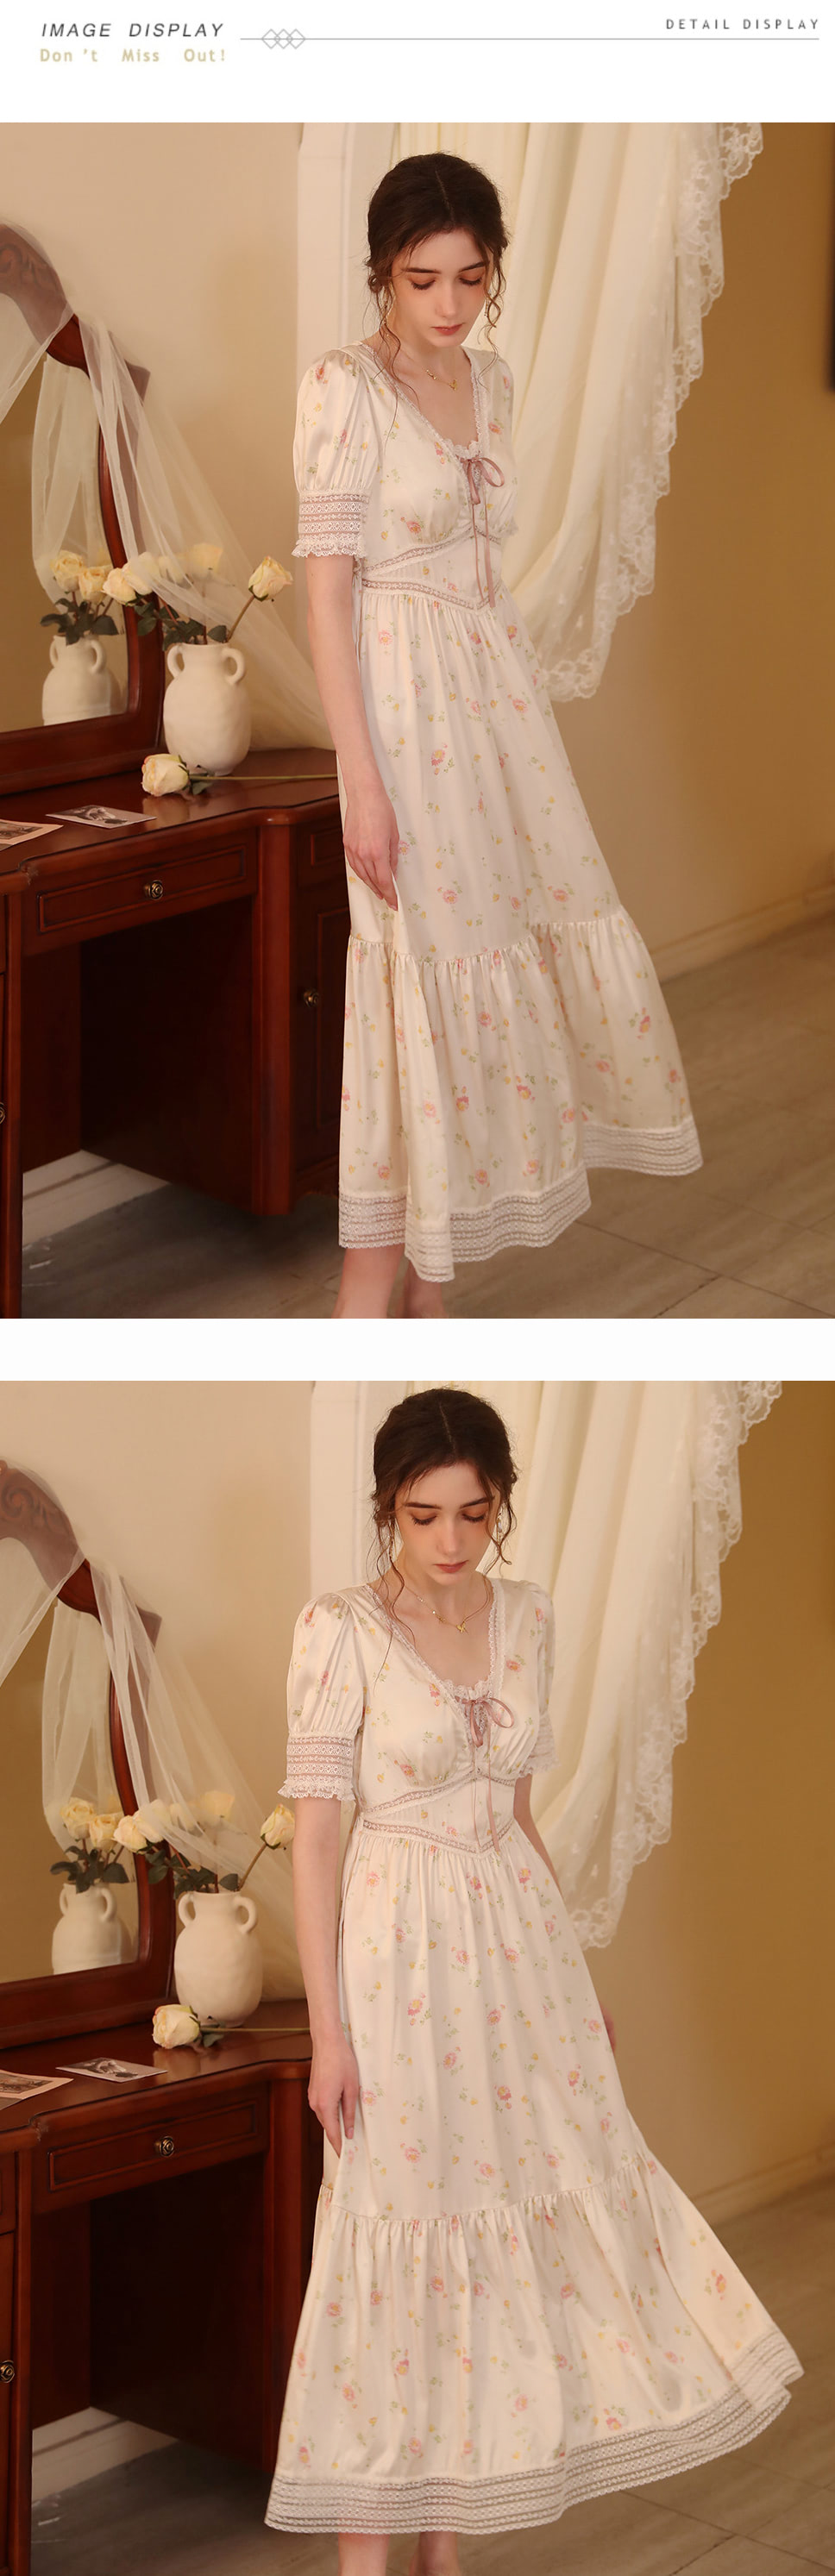 Sweet-French-Princess-Style-Printed-Short-Sleeve-Satin-Home-Wear13